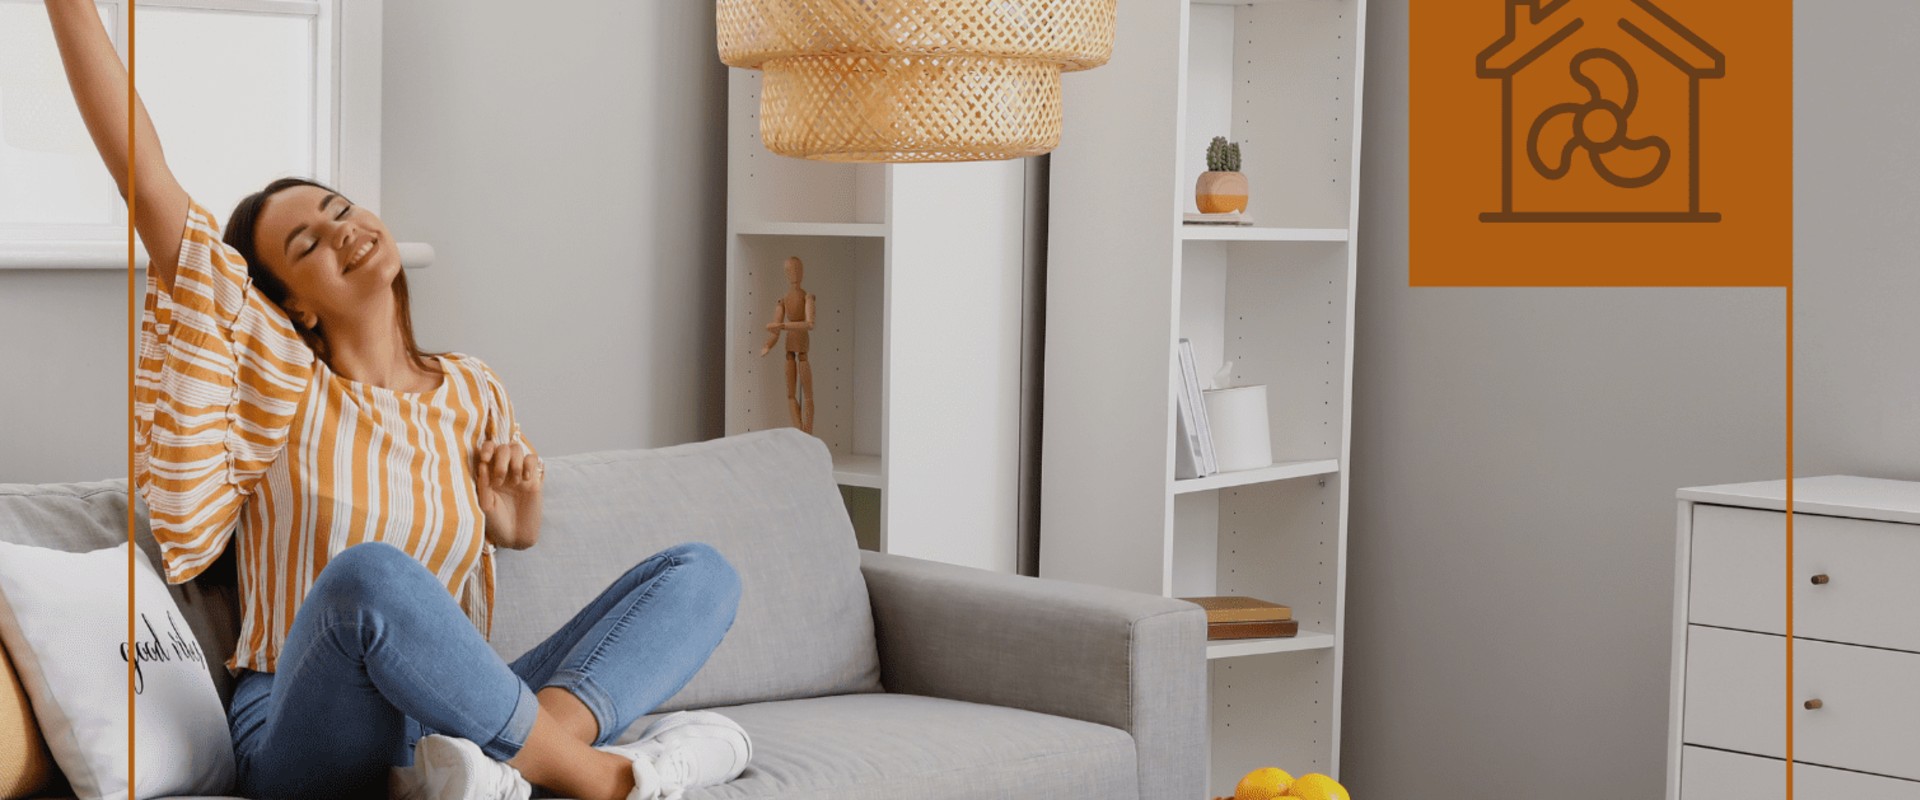 Enhance Indoor Air Quality With the Best Home HVAC Air Filters for Allergies